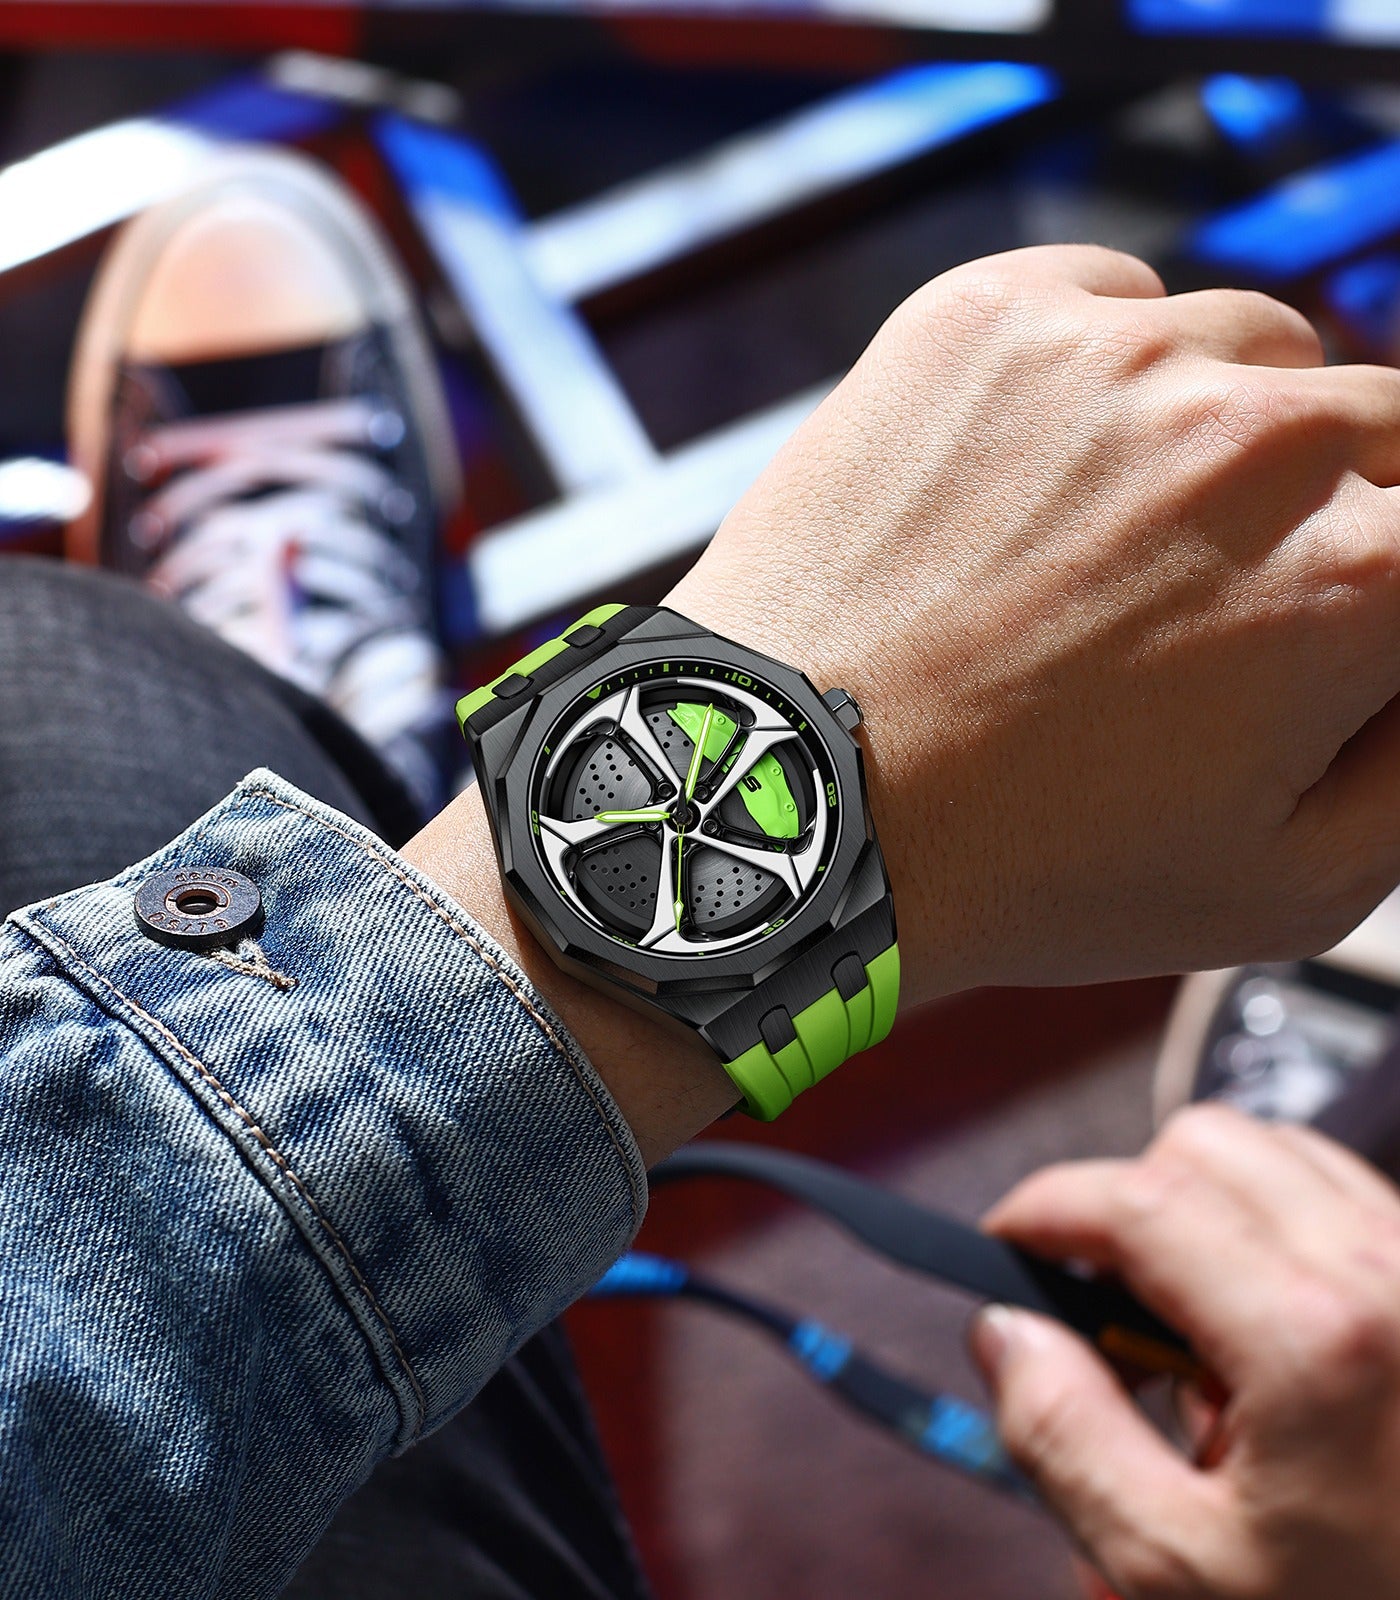 RS q8 Wheel watch by driveclox